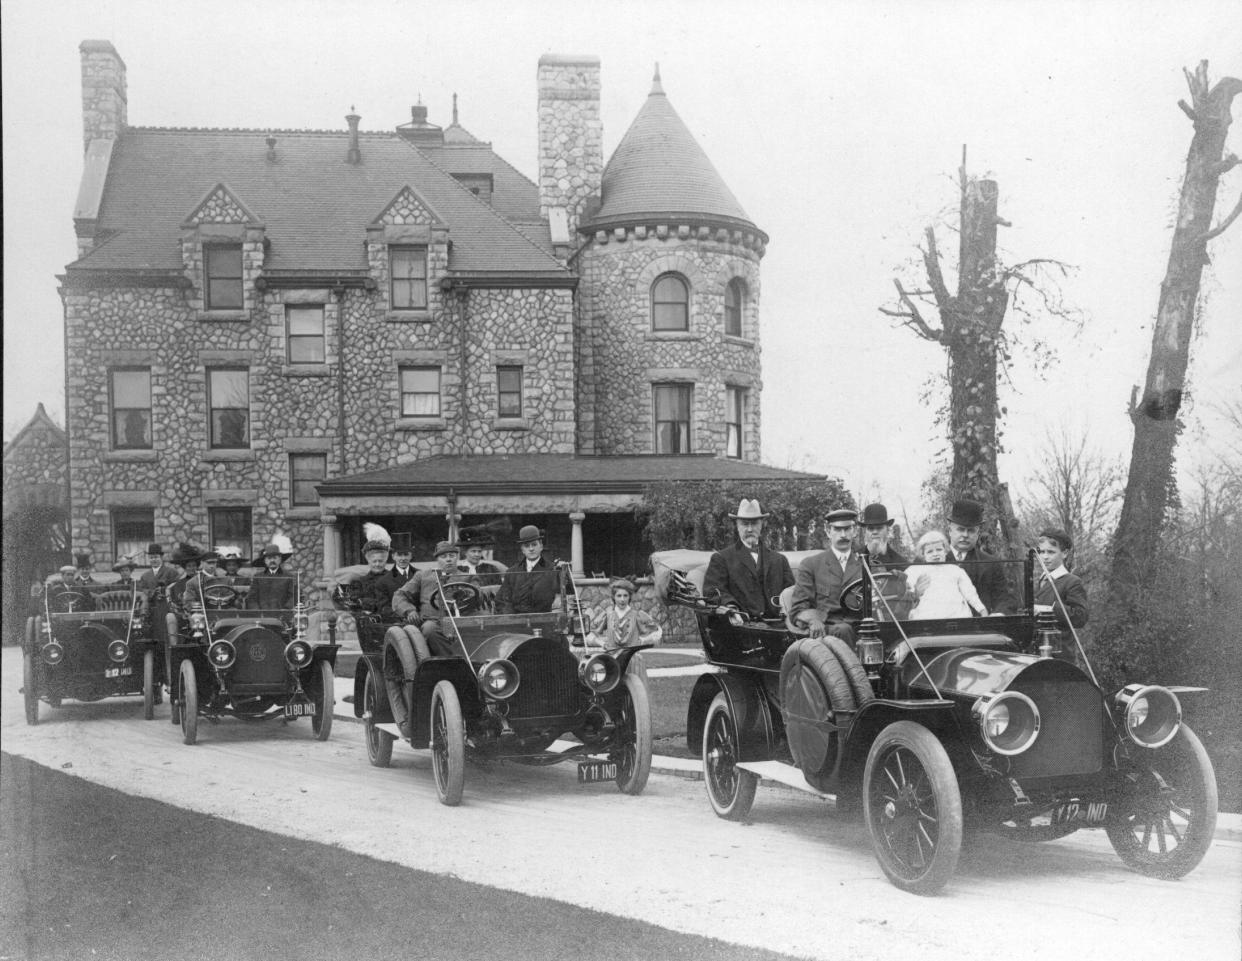 The south side of Tippecanoe Place, the grand South Bend home Clement Studebaker had built in 1889, is visible in this 1908 photo. In the foreground are four automobiles with some of the Studebaker clan, including J.M. Studebaker seated in the right rear of the front car.